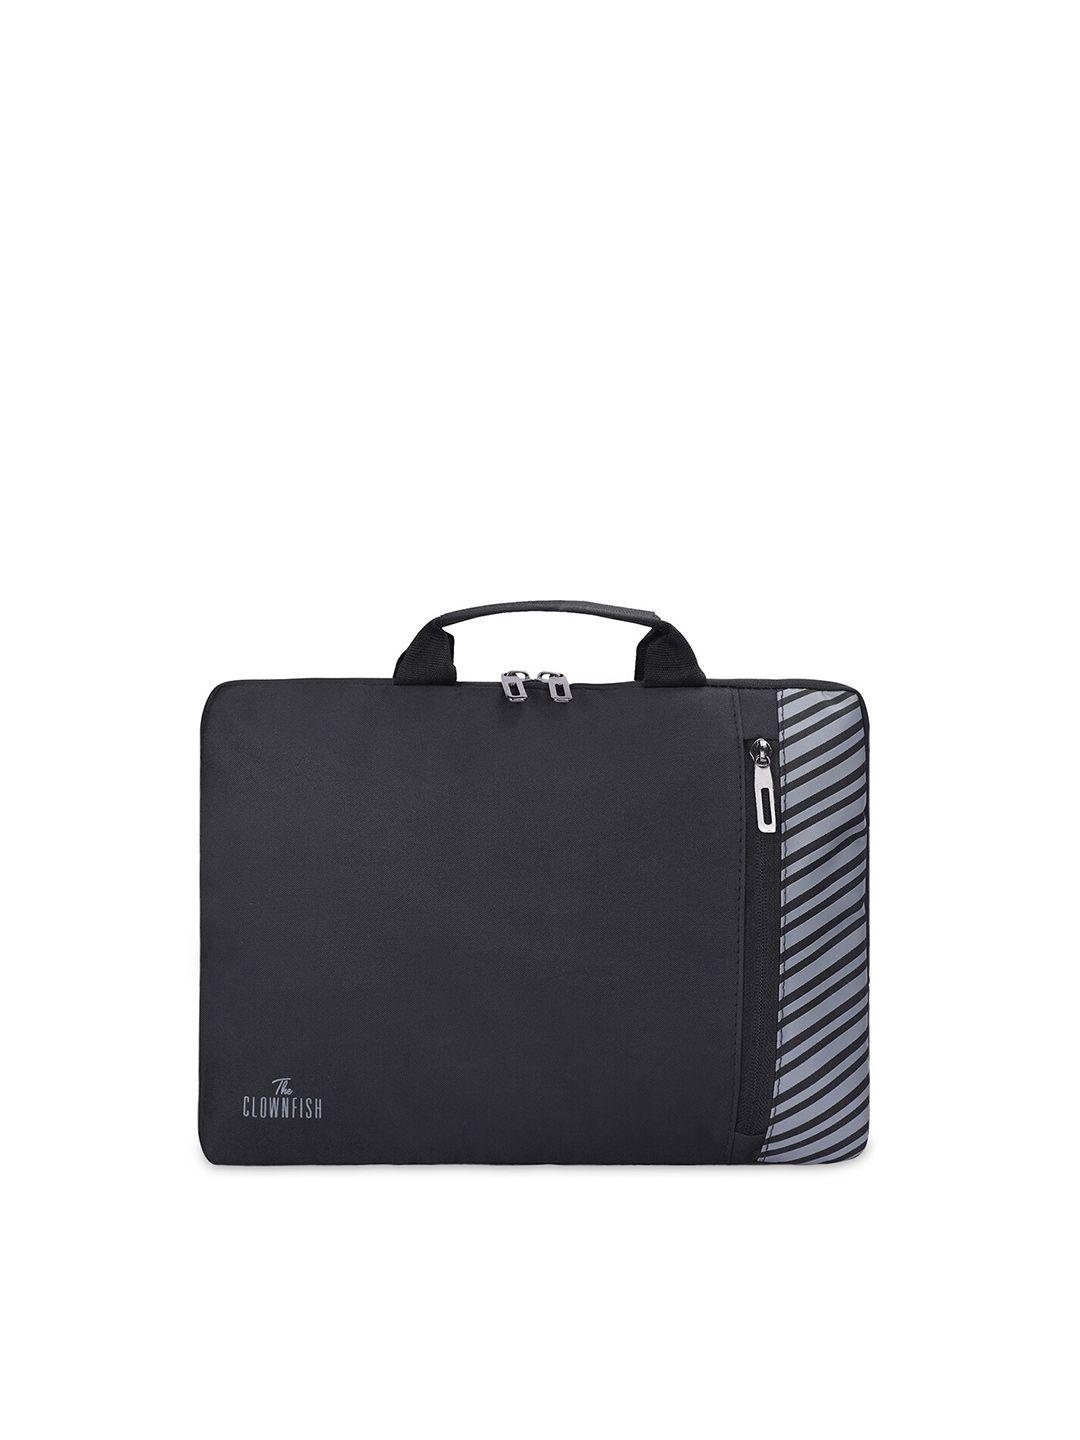 the clownfish solid comfort padded laptop sleeve